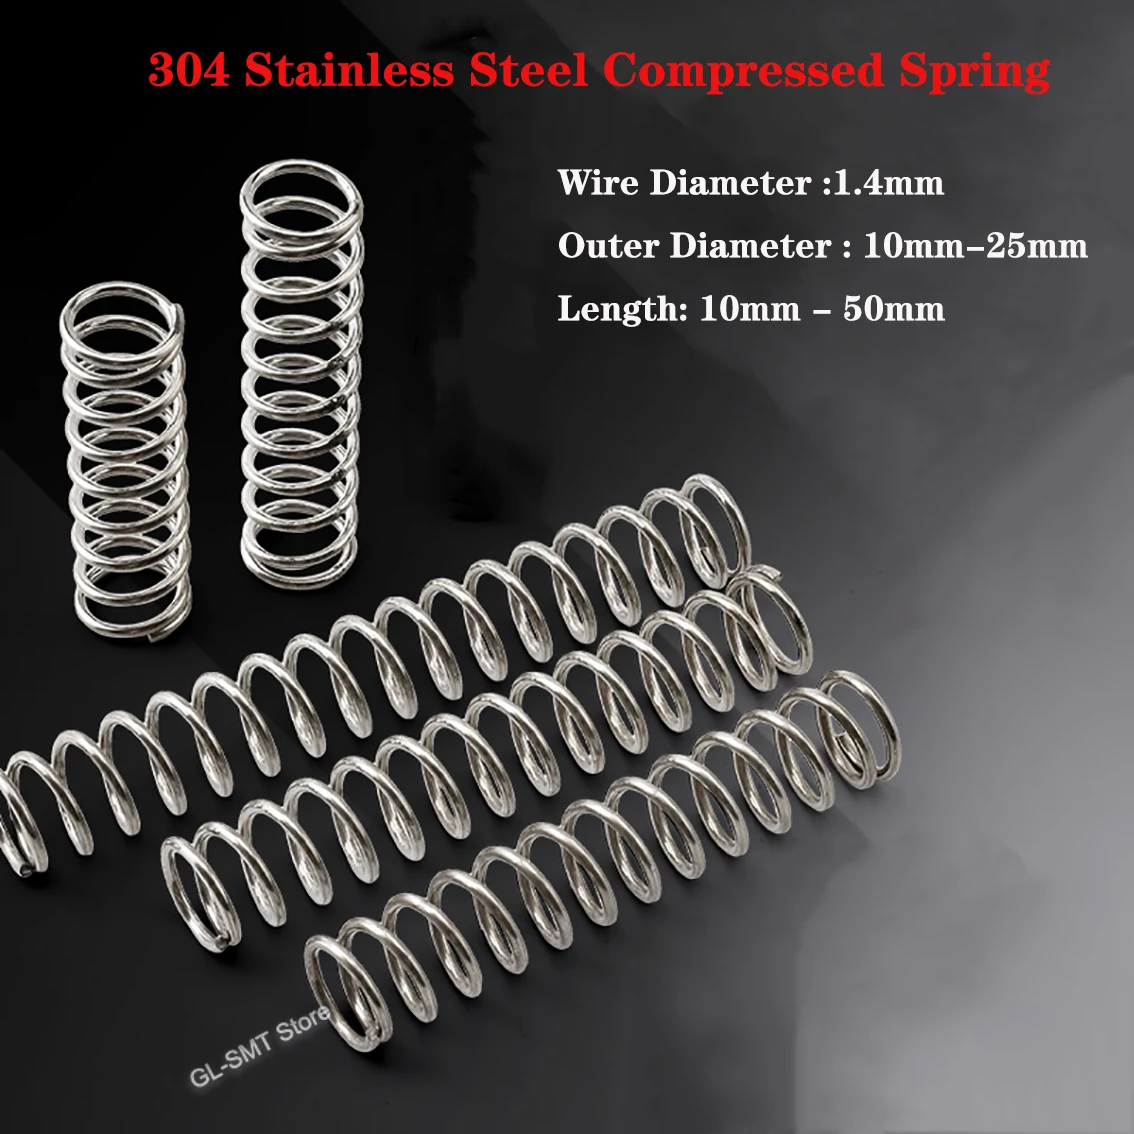 

10pcs Compression Spring Wire Dia 1.4mm 304 Stainless Steel Y-Type Compressed Spring Return Spring Length 10-50mm